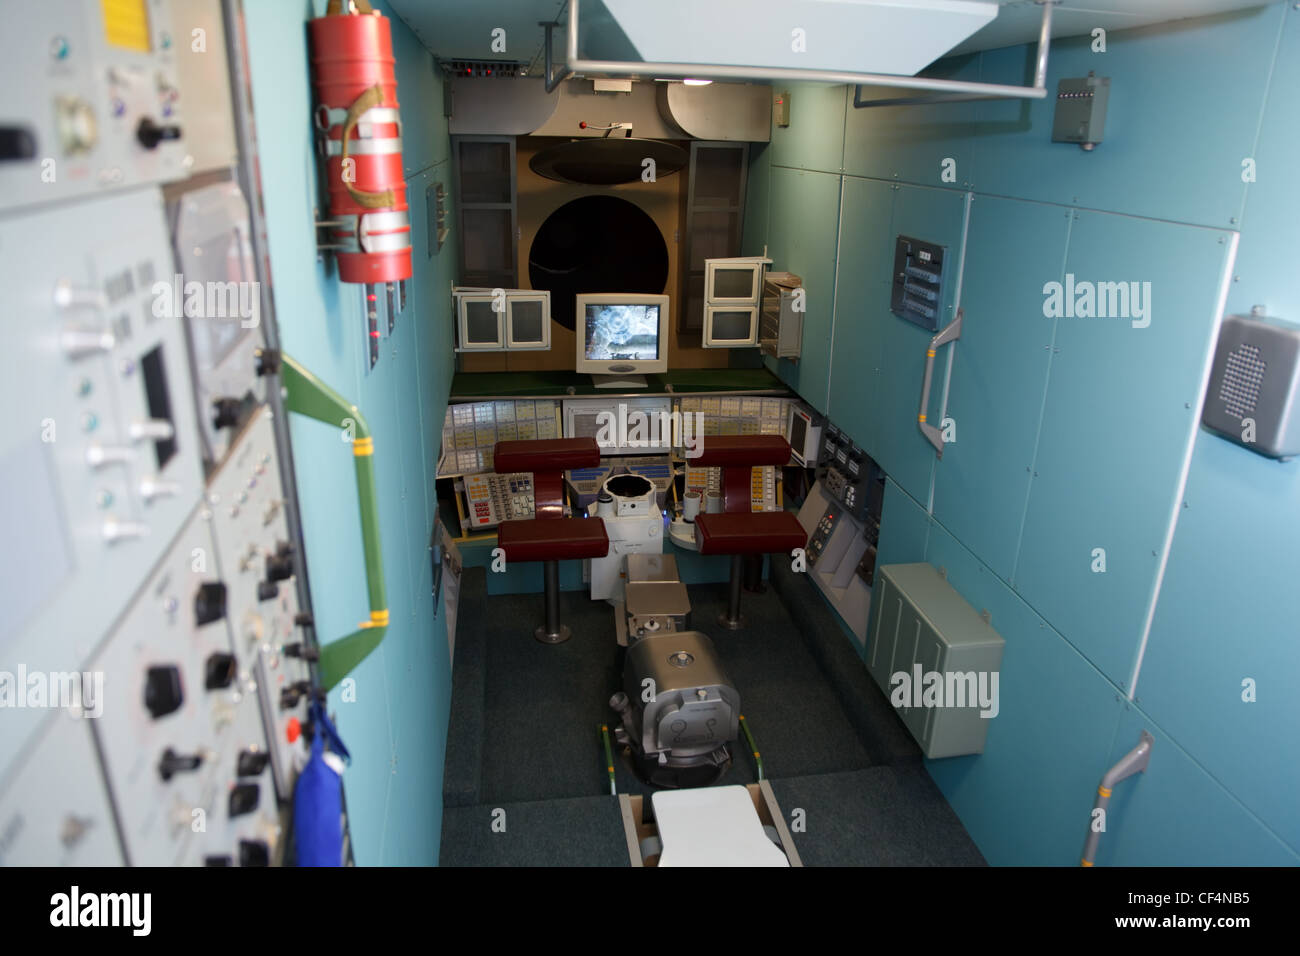 MOSCOW, RUSSIA - NOVEMBER 8: Museum of Soviet space exploration. Interior space station. November 8, 2009 in Moscow, Russia. Stock Photo